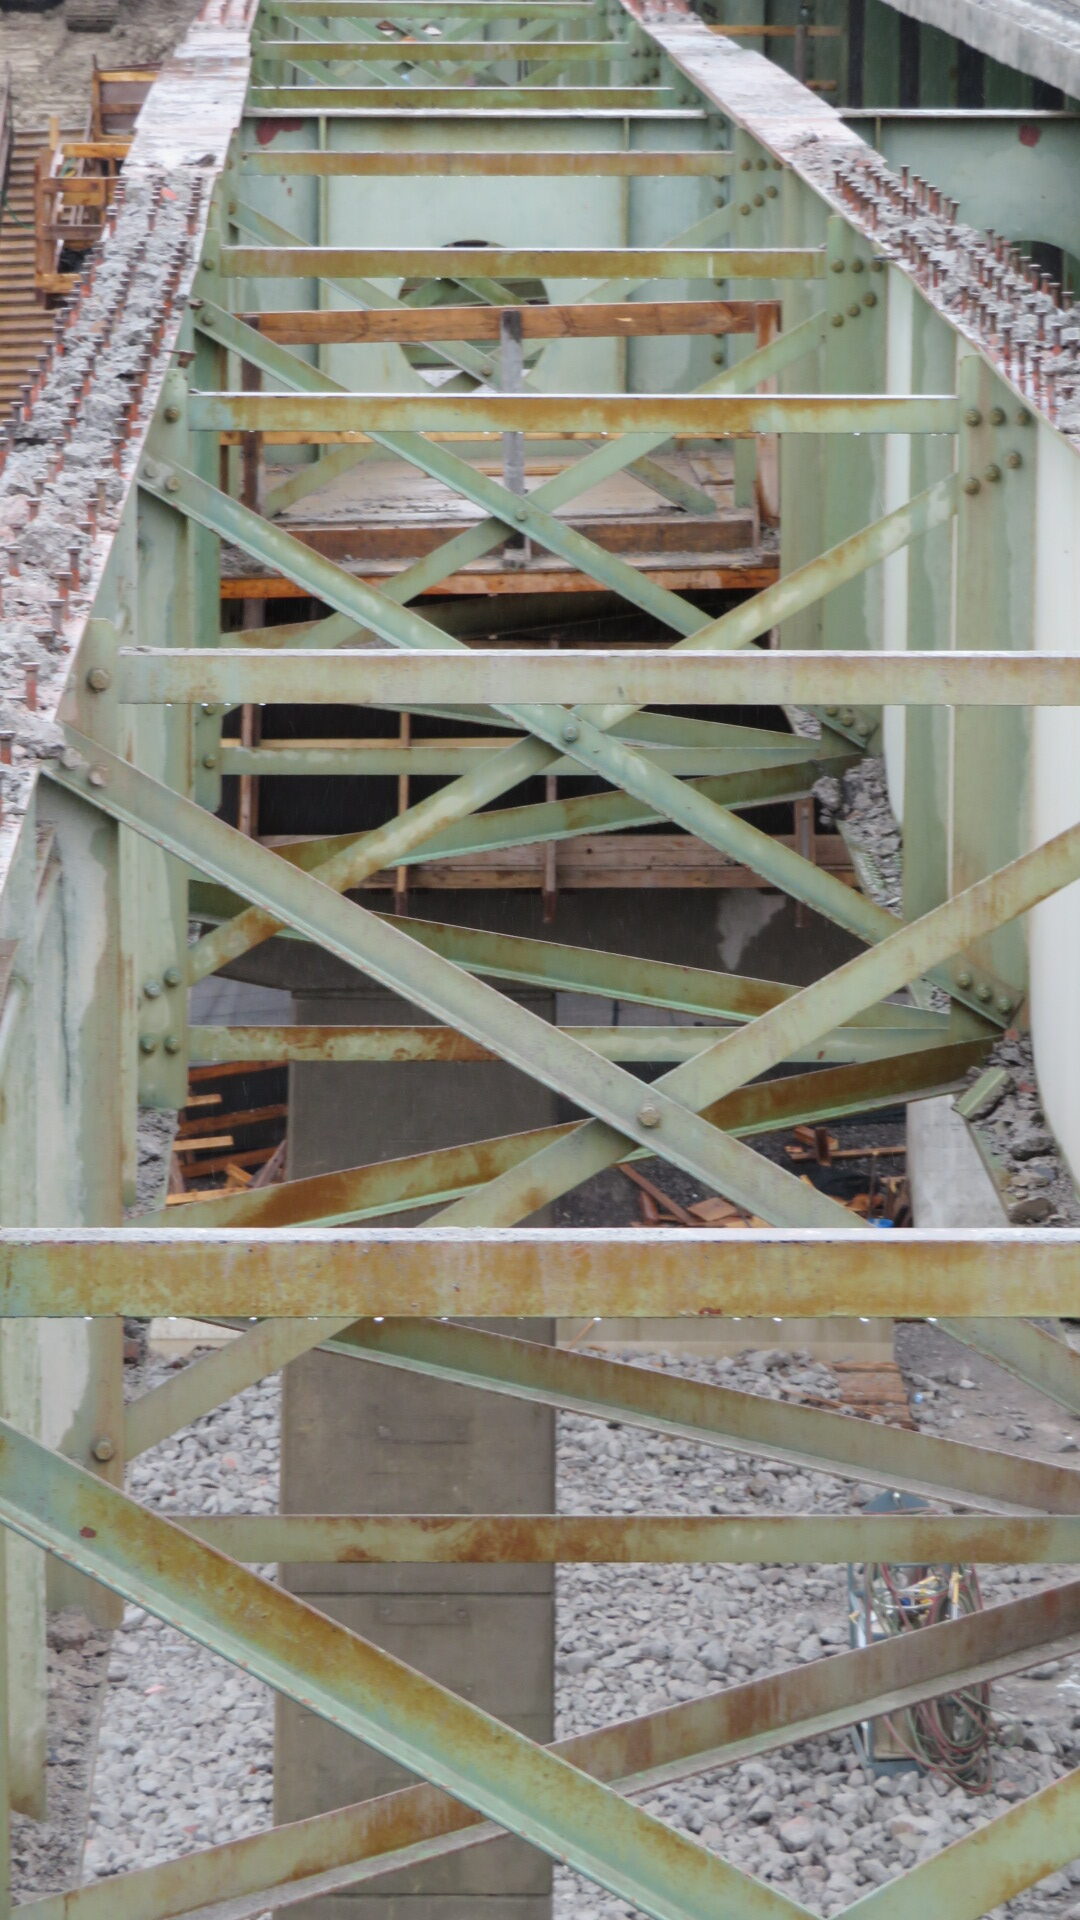 A look down through the girders after removal